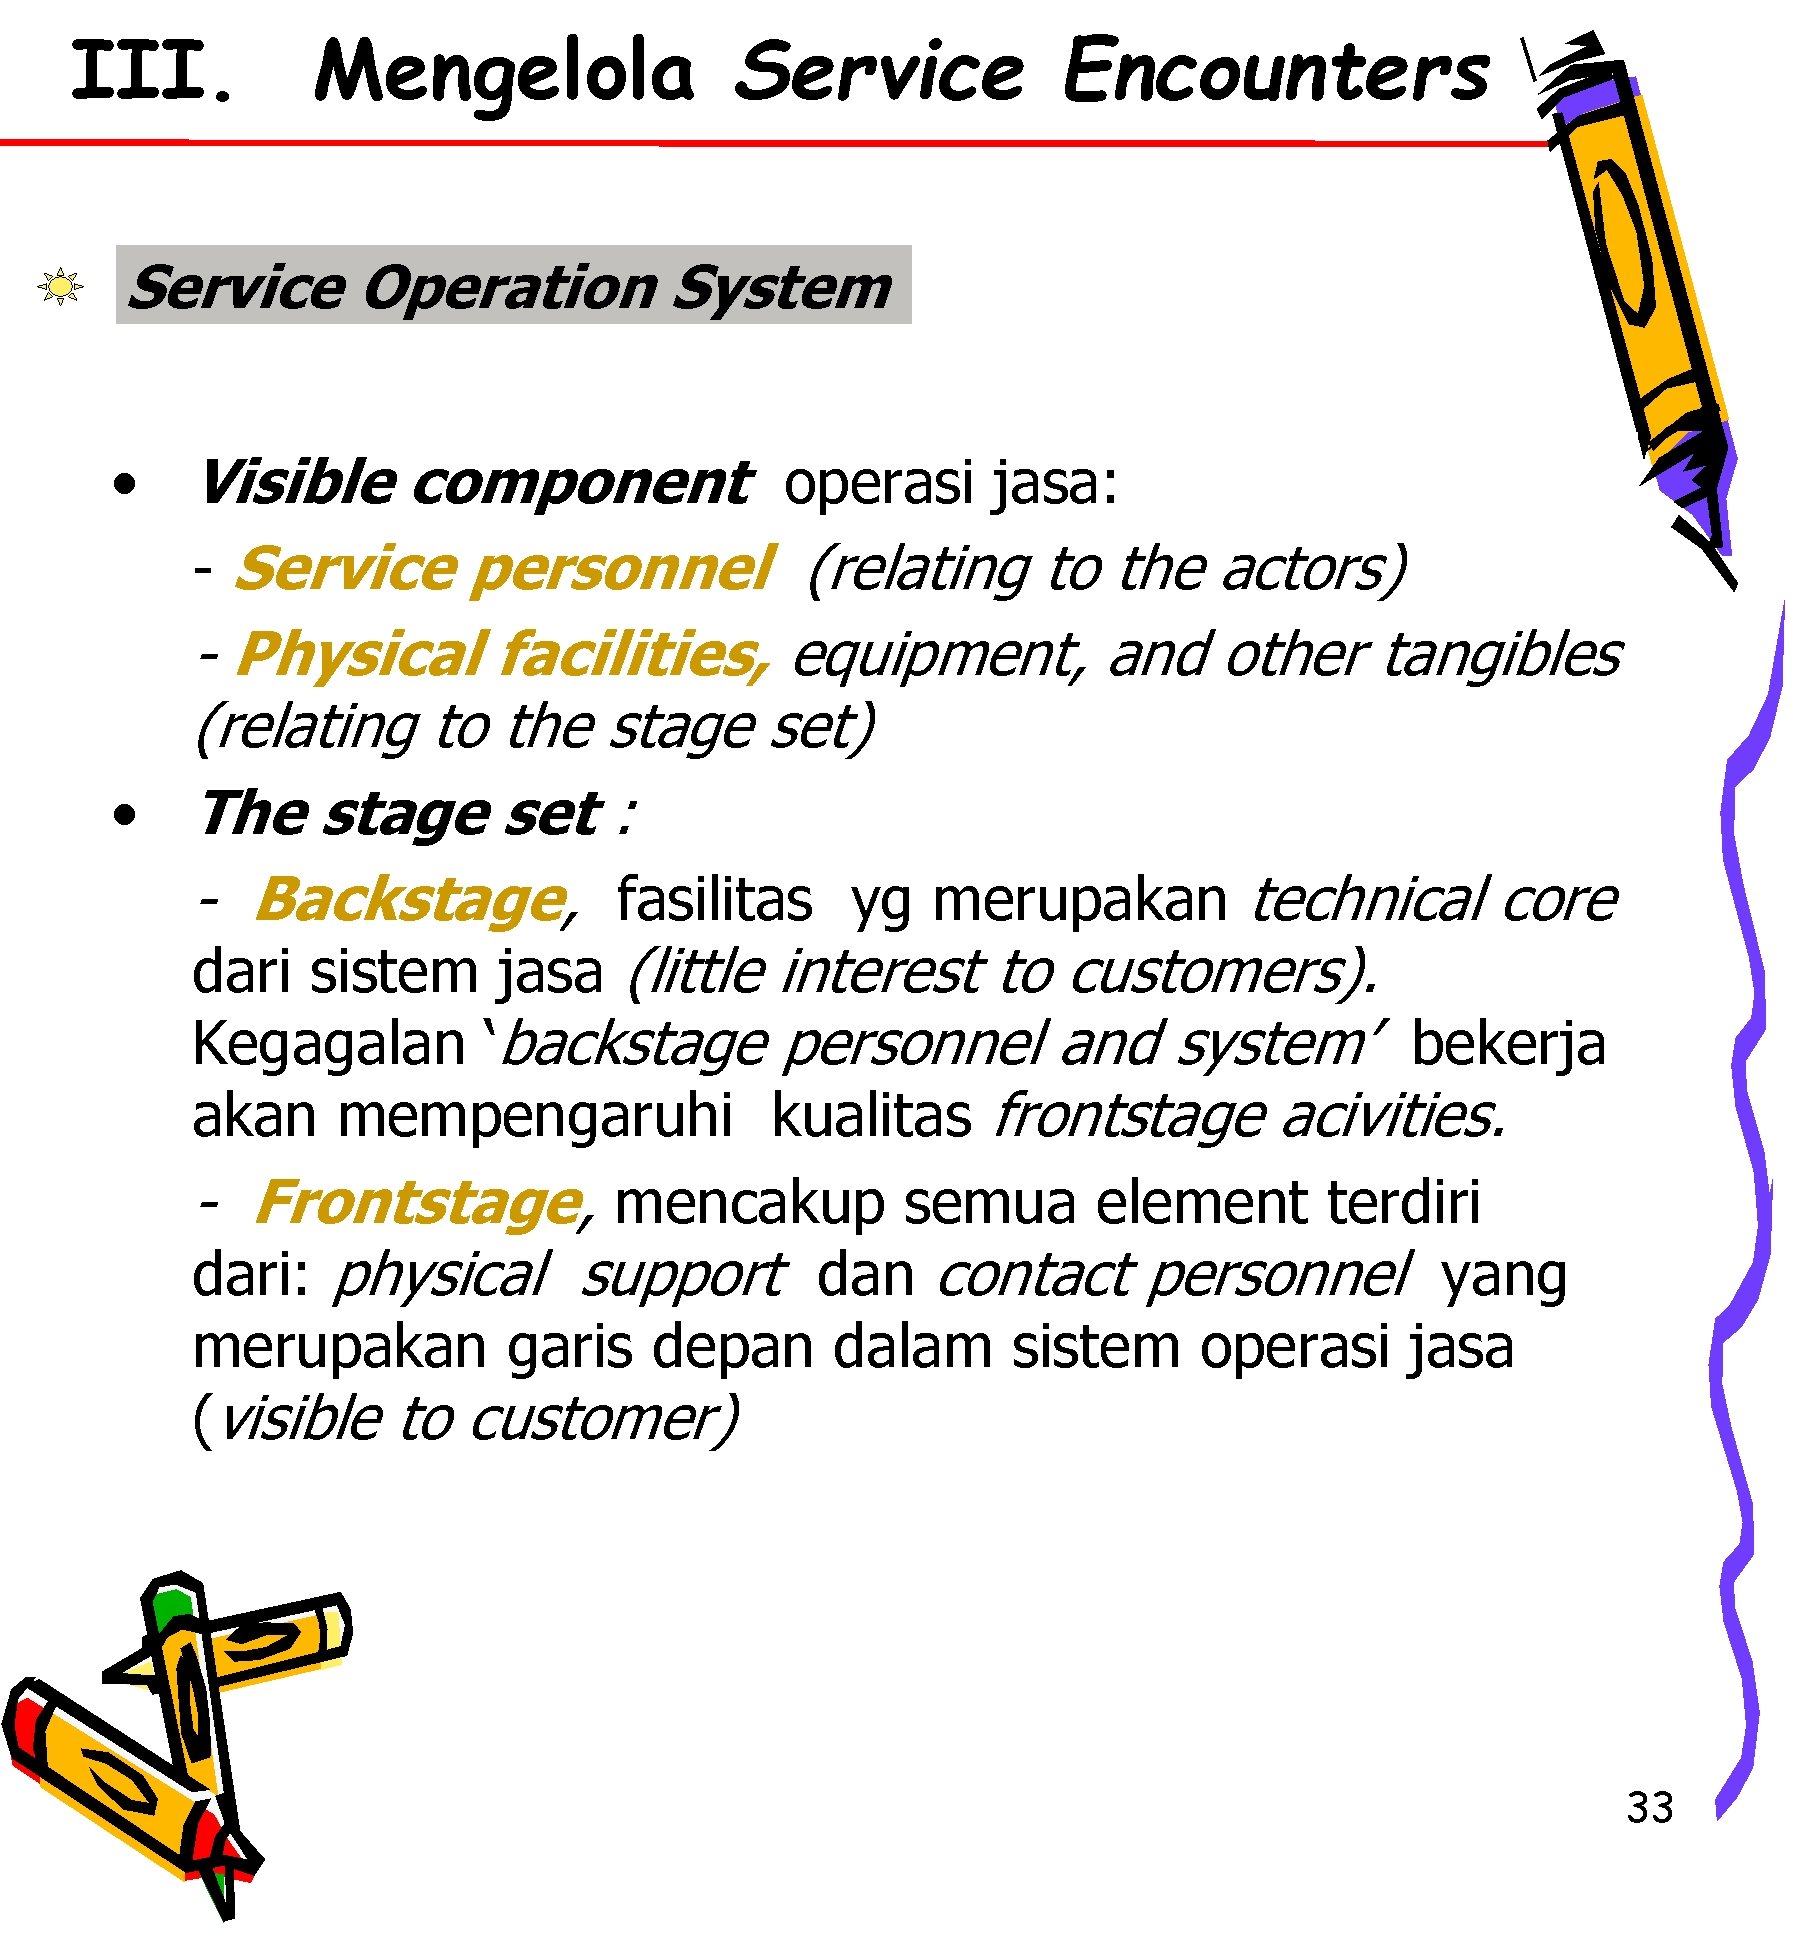 III. Mengelola Service Encounters Service Operation System • Visible component operasi jasa: - Service